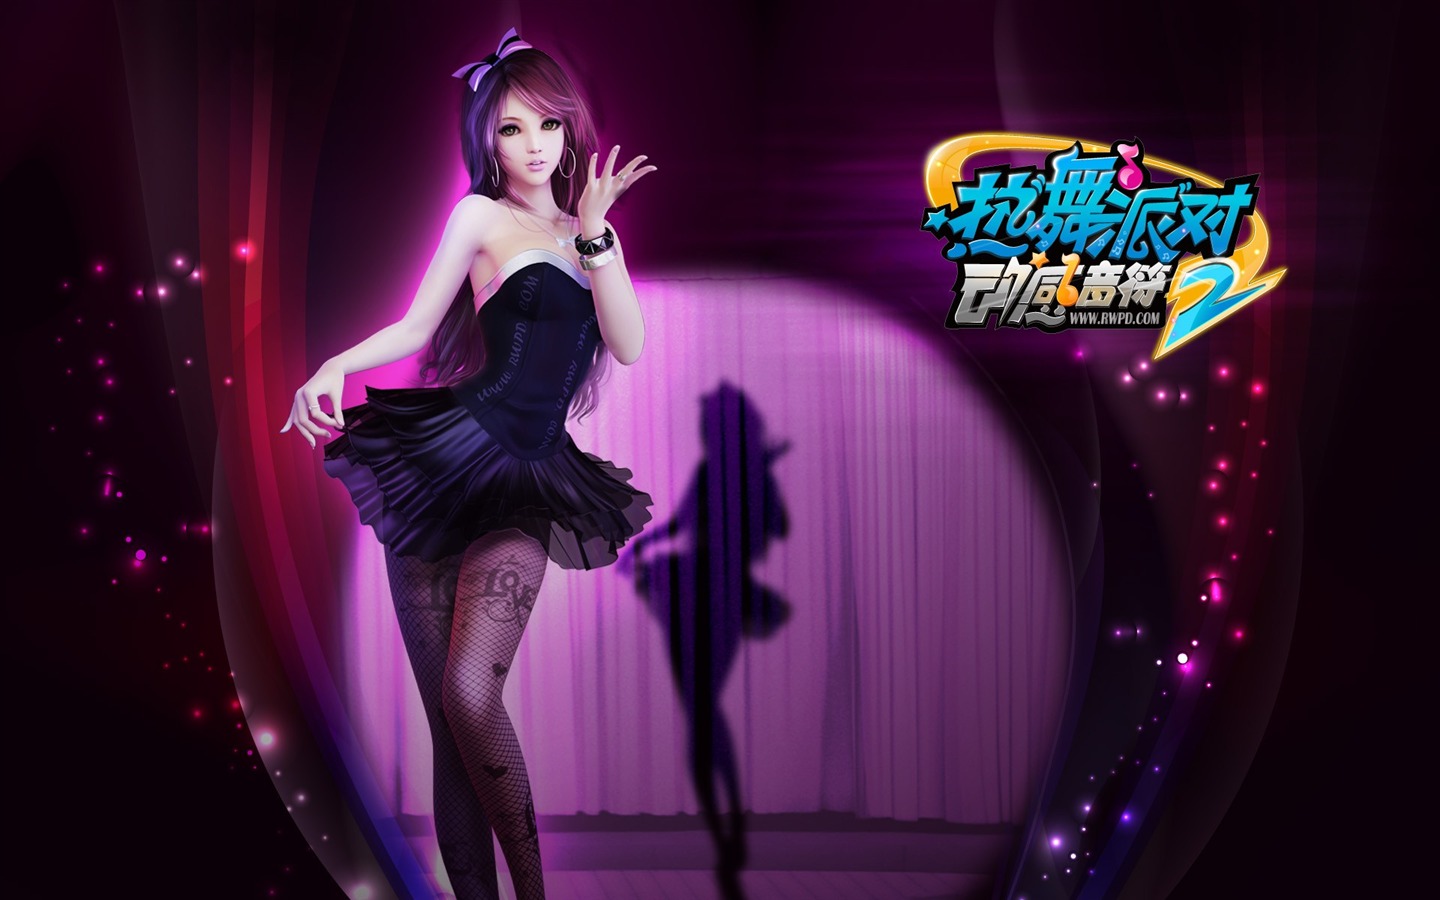 Online game Hot Dance Party II official wallpapers #29 - 1440x900